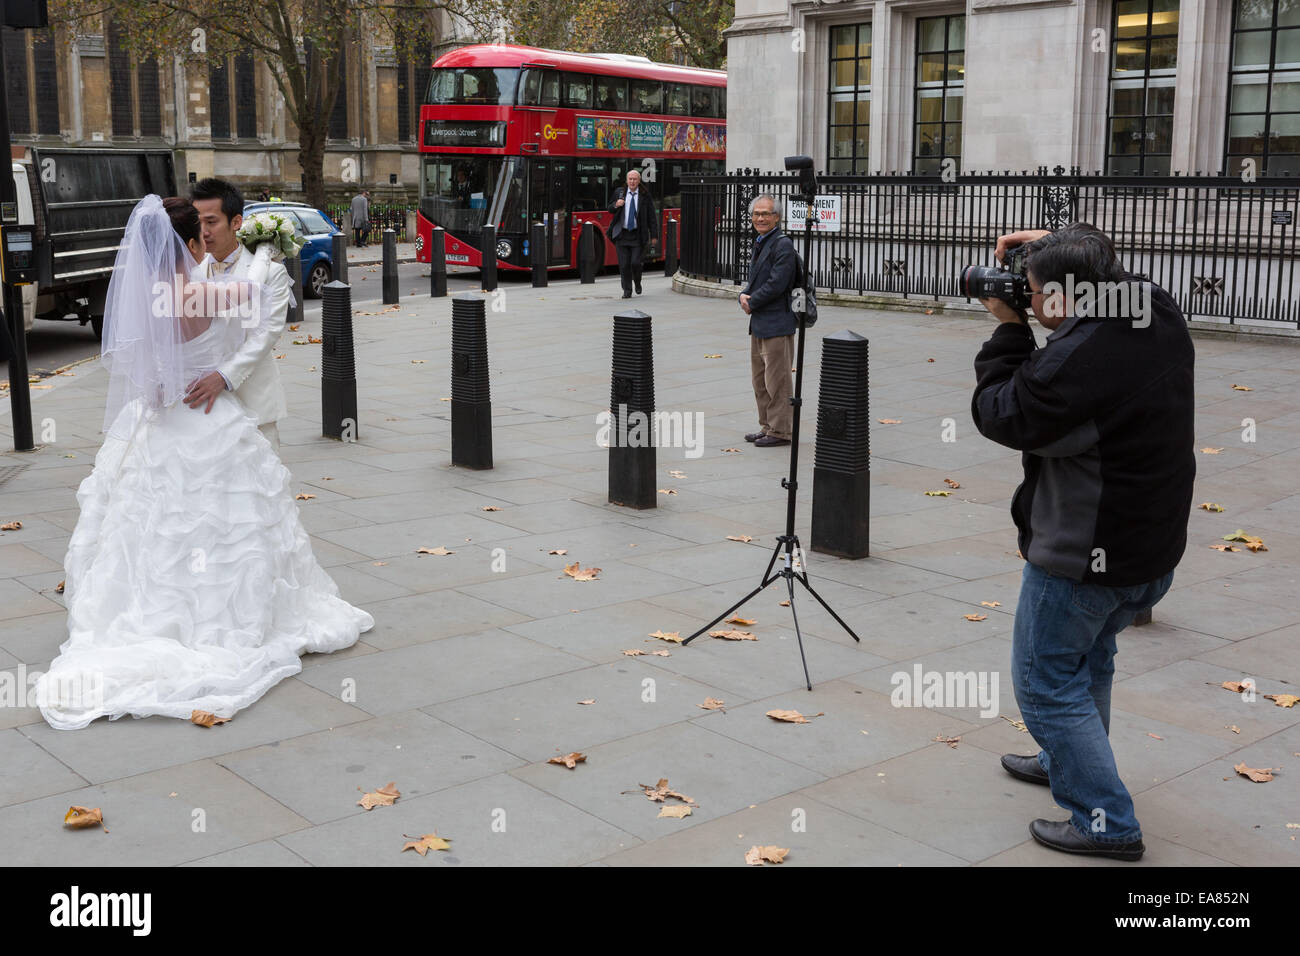 A Chinese couple have wedding photographs taken outside Westminster Abbey in London, England, UK Stock Photo